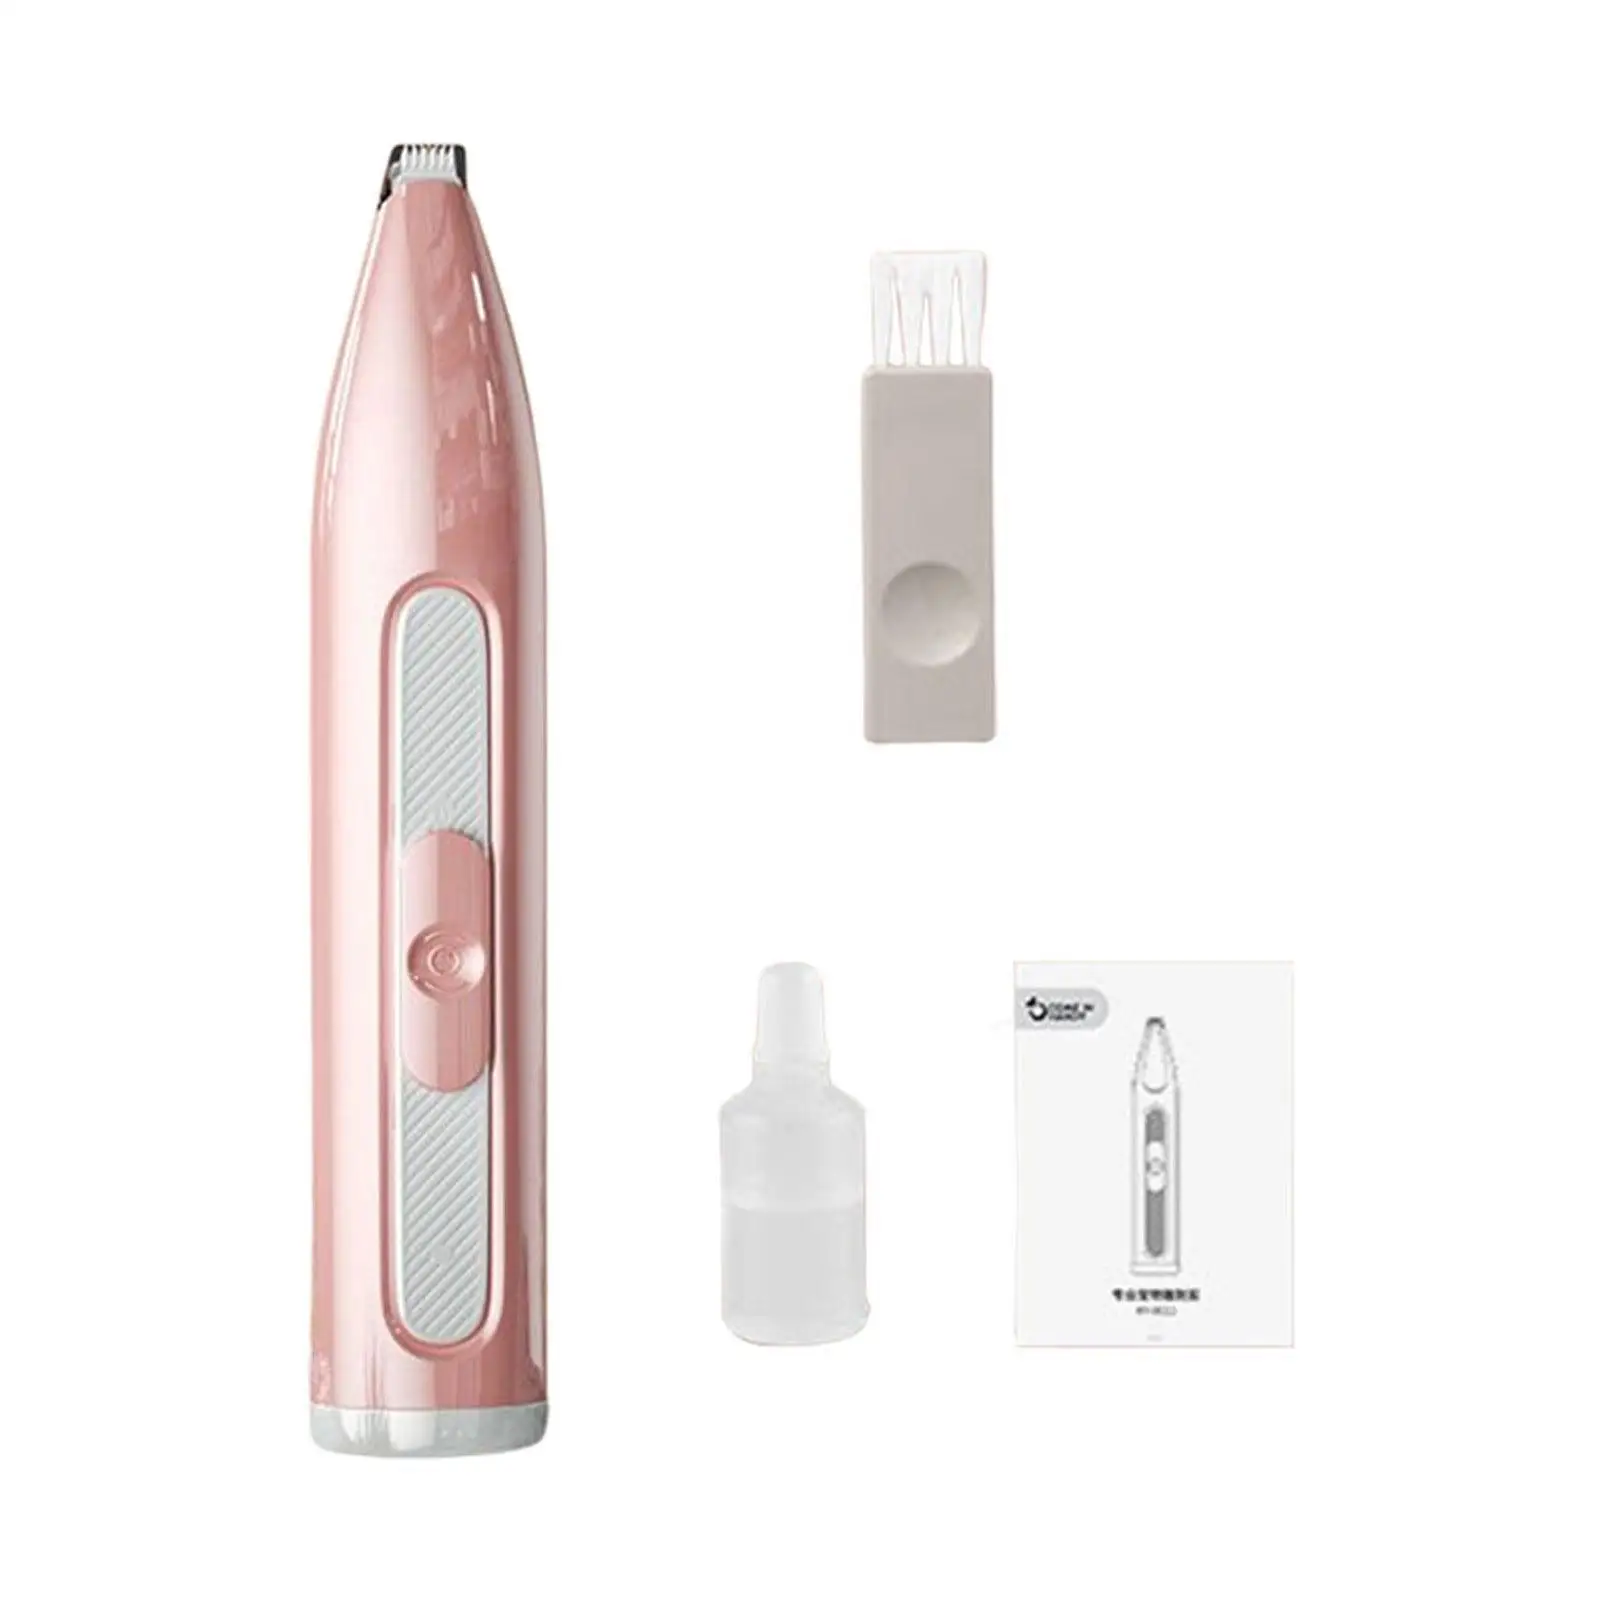 Electrical Pet Nail Hair Trimmer Dog Hair Clipper Tool Quiet Kitten Haircut Cordless Small for Cats Trimming Toes Paw Eyes Rump